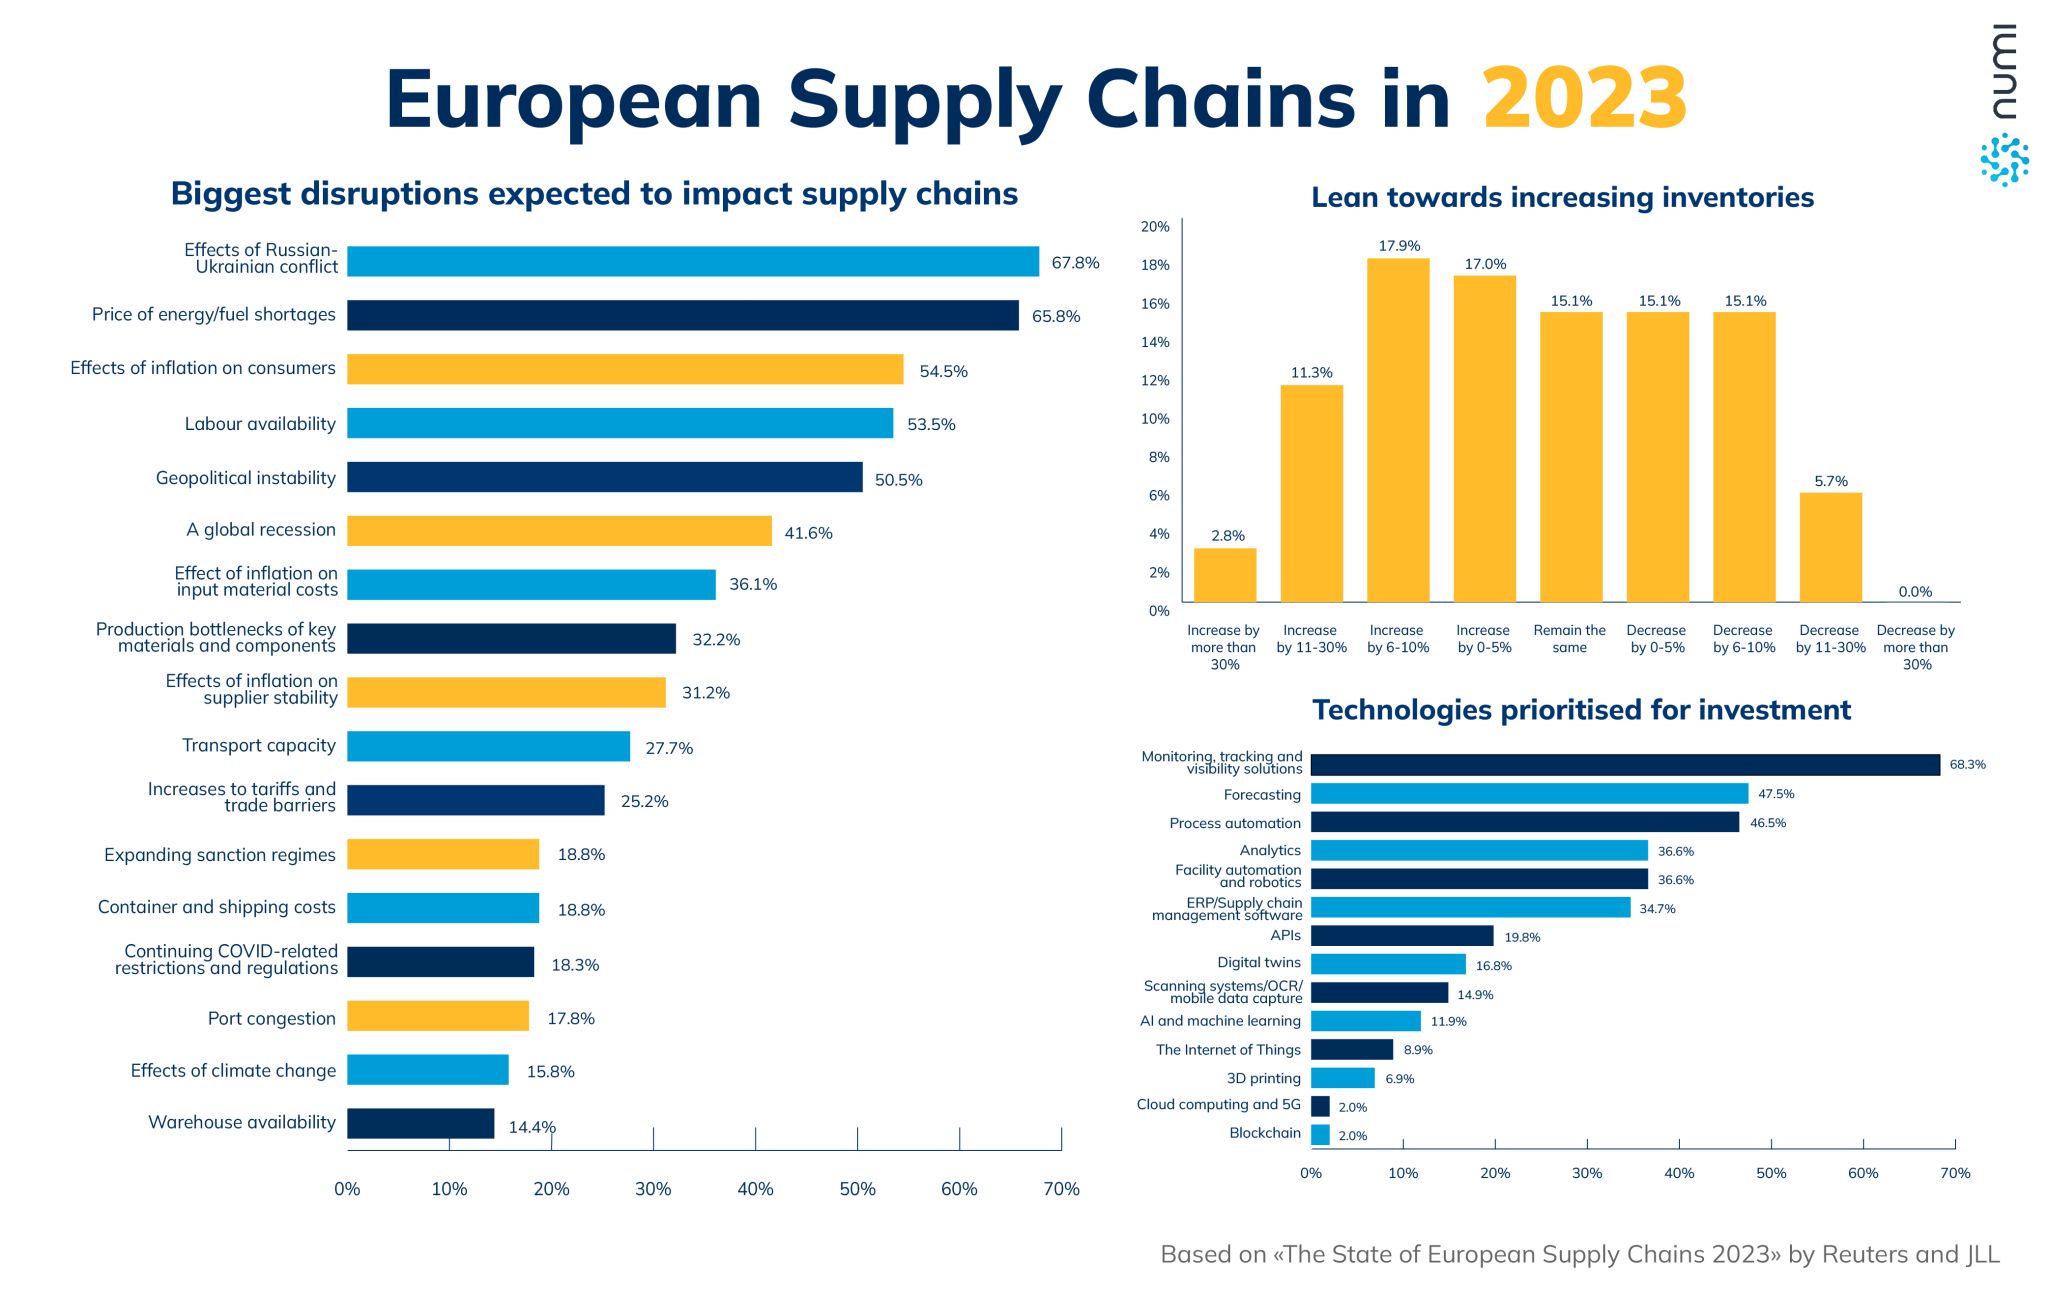 European Supply Chain Challenges 2023 - Source: The State of of European Supply Chains 2023 by Reuters and JLL